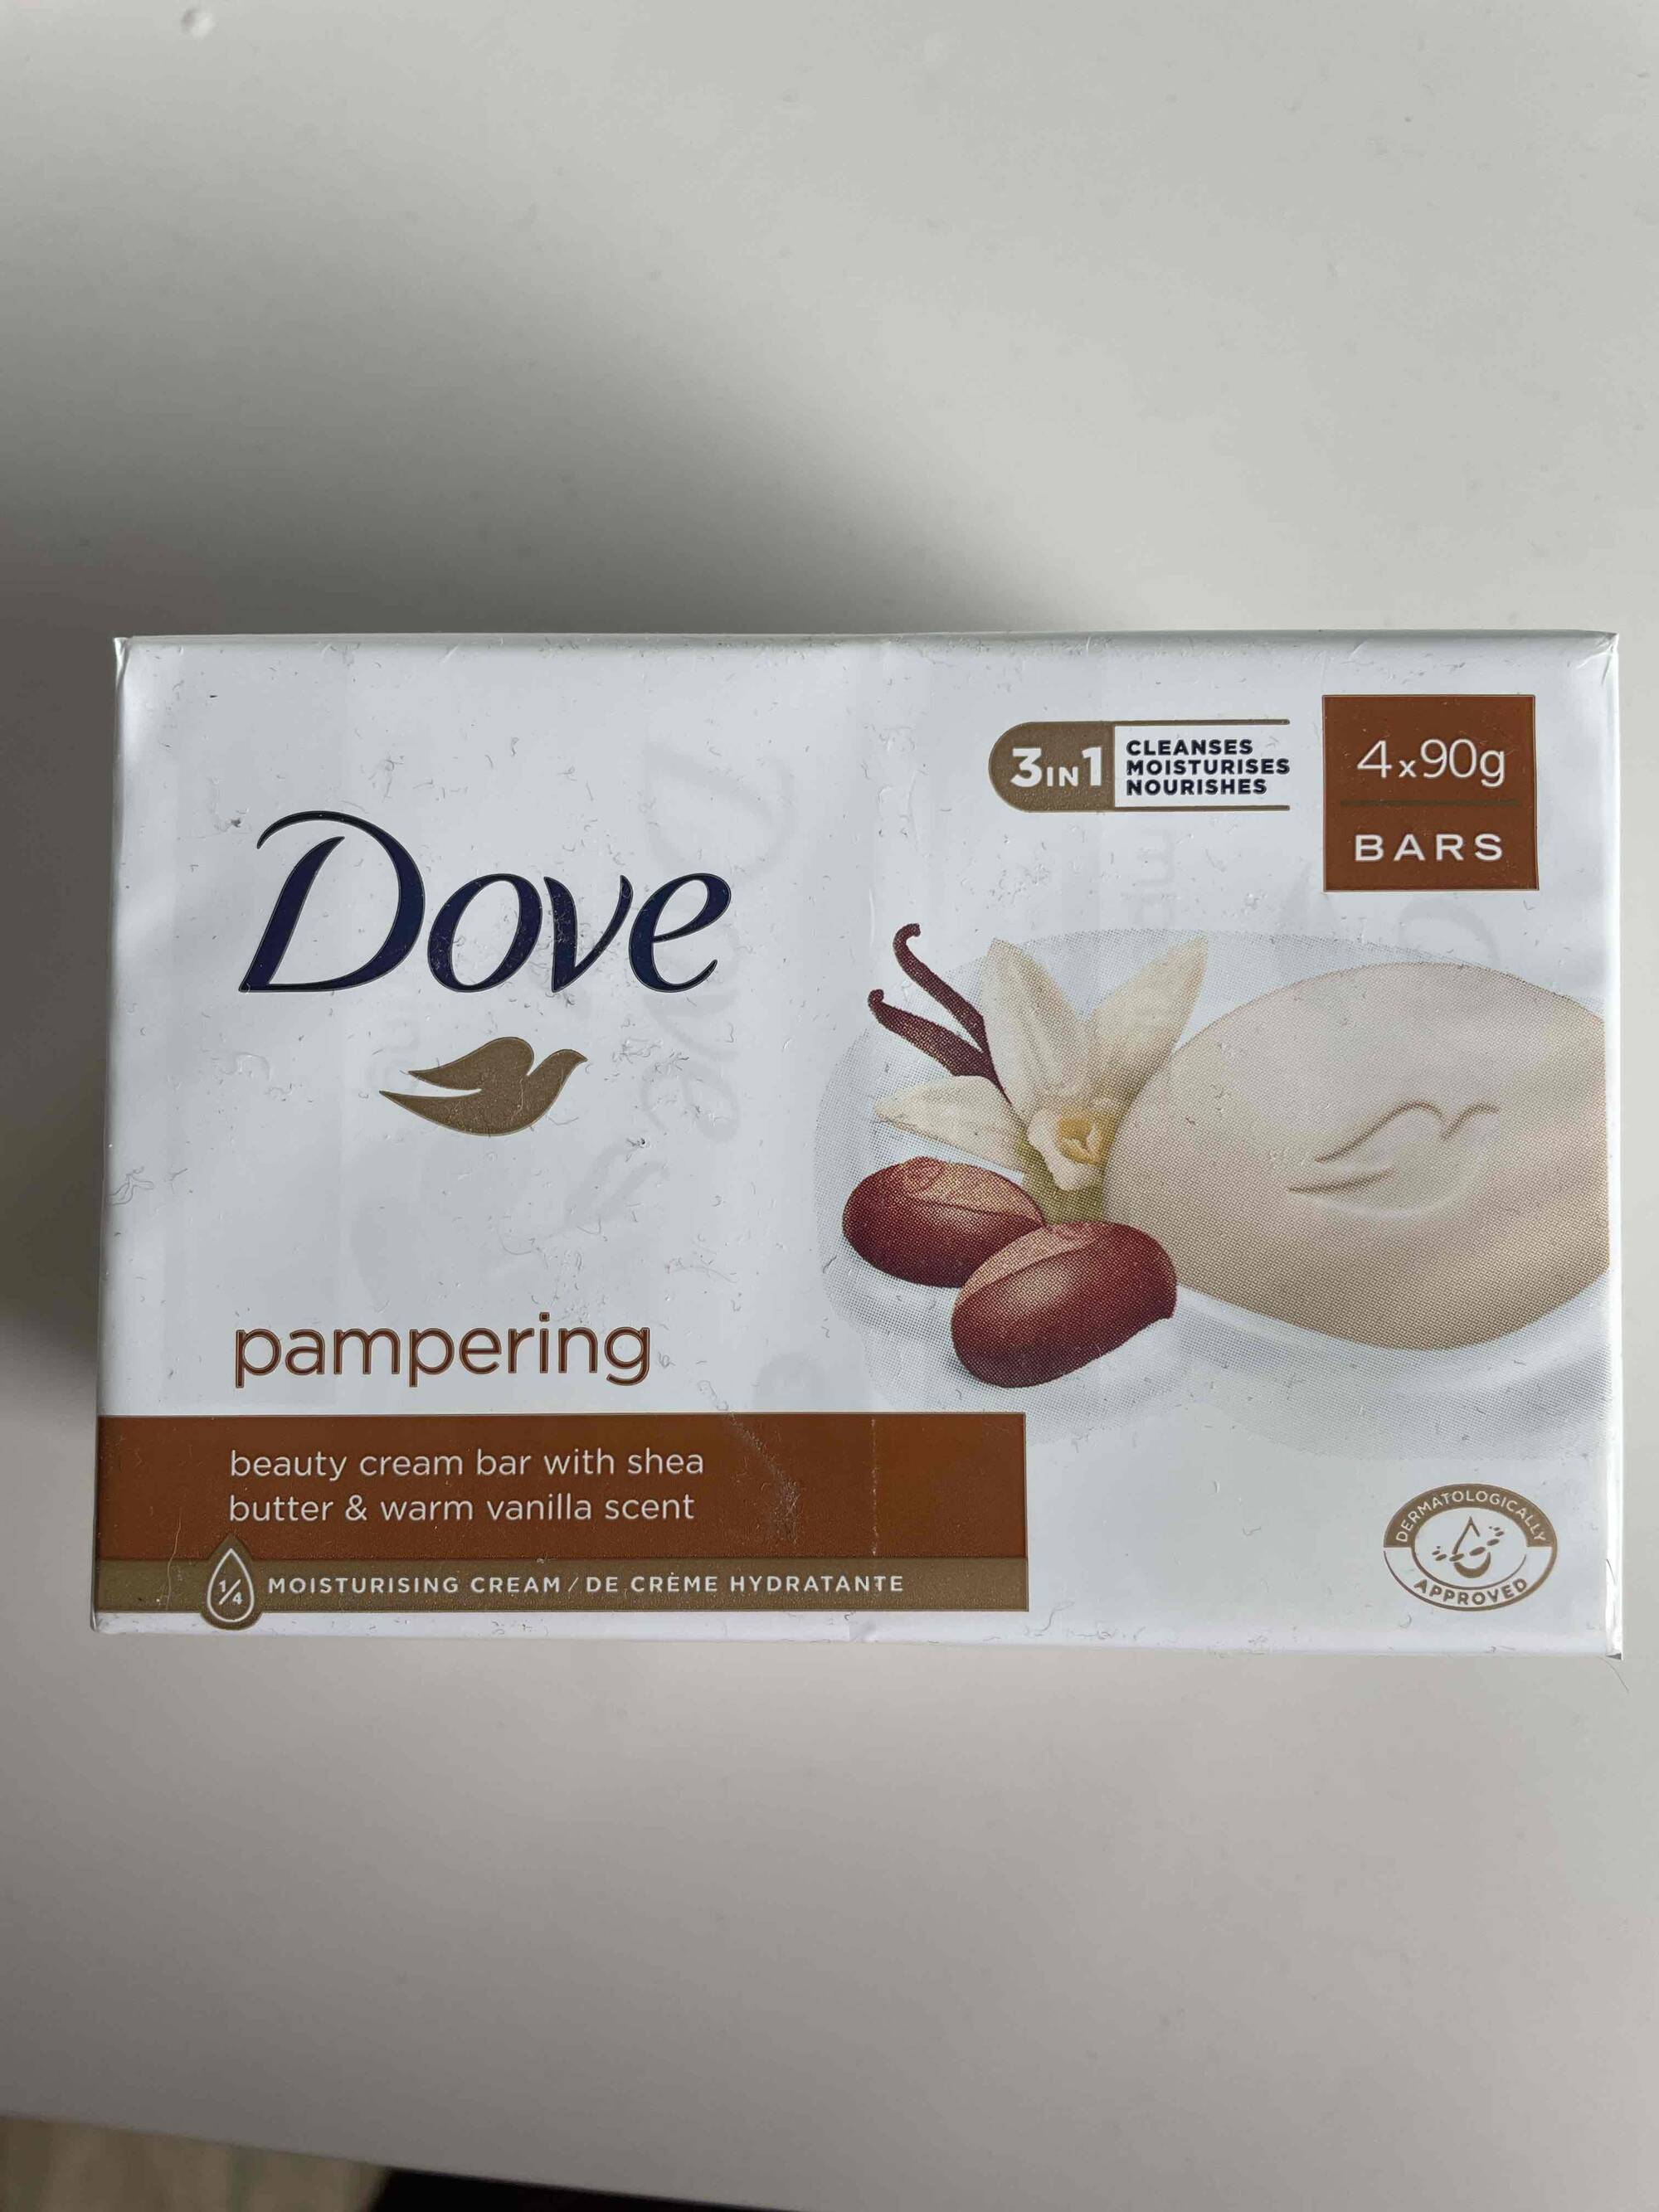 DOVE - Pampering beauty cream bar with shea